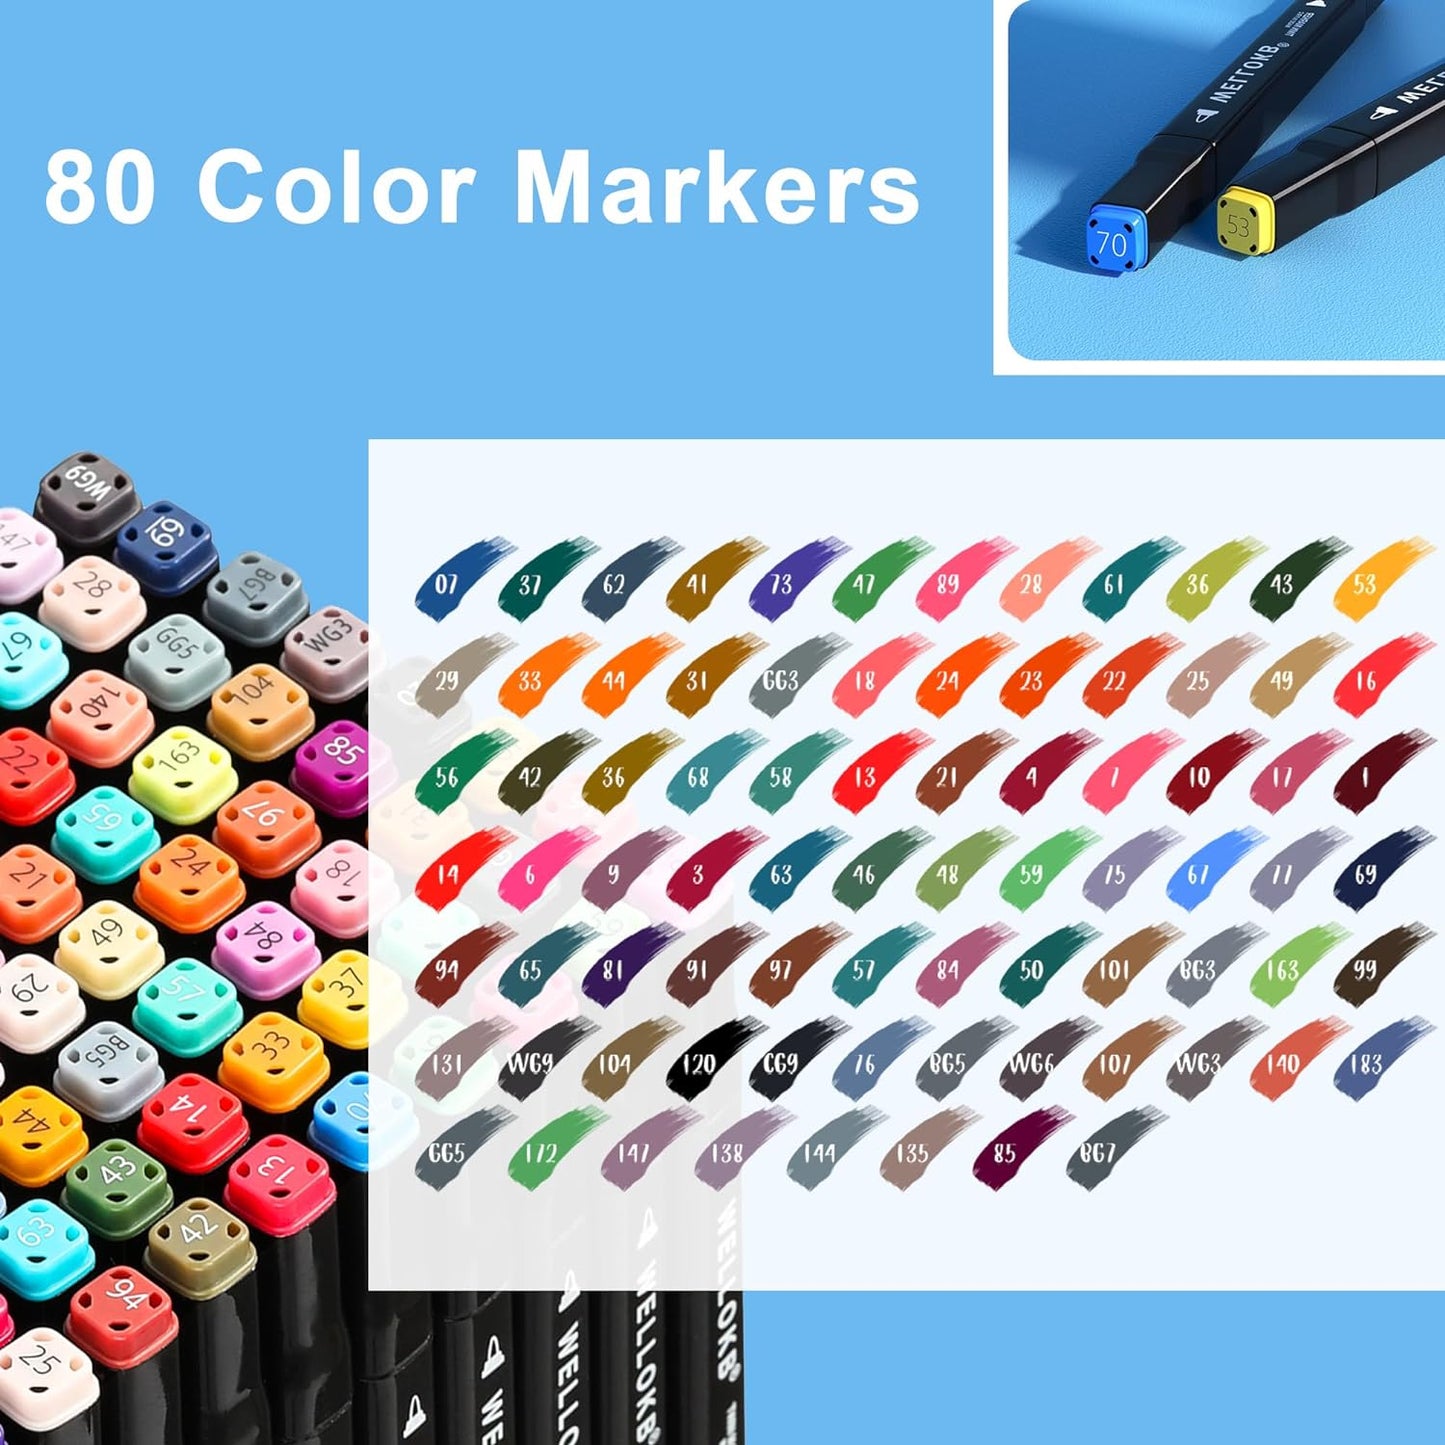 New Dual Brush Tip Alcohol Markers Set 80 Vibrant Colors, Non-Toxic Art Supplies for Kids and Adults, Perfect for Drawing, Sketching, and Illustration in Coloring Books